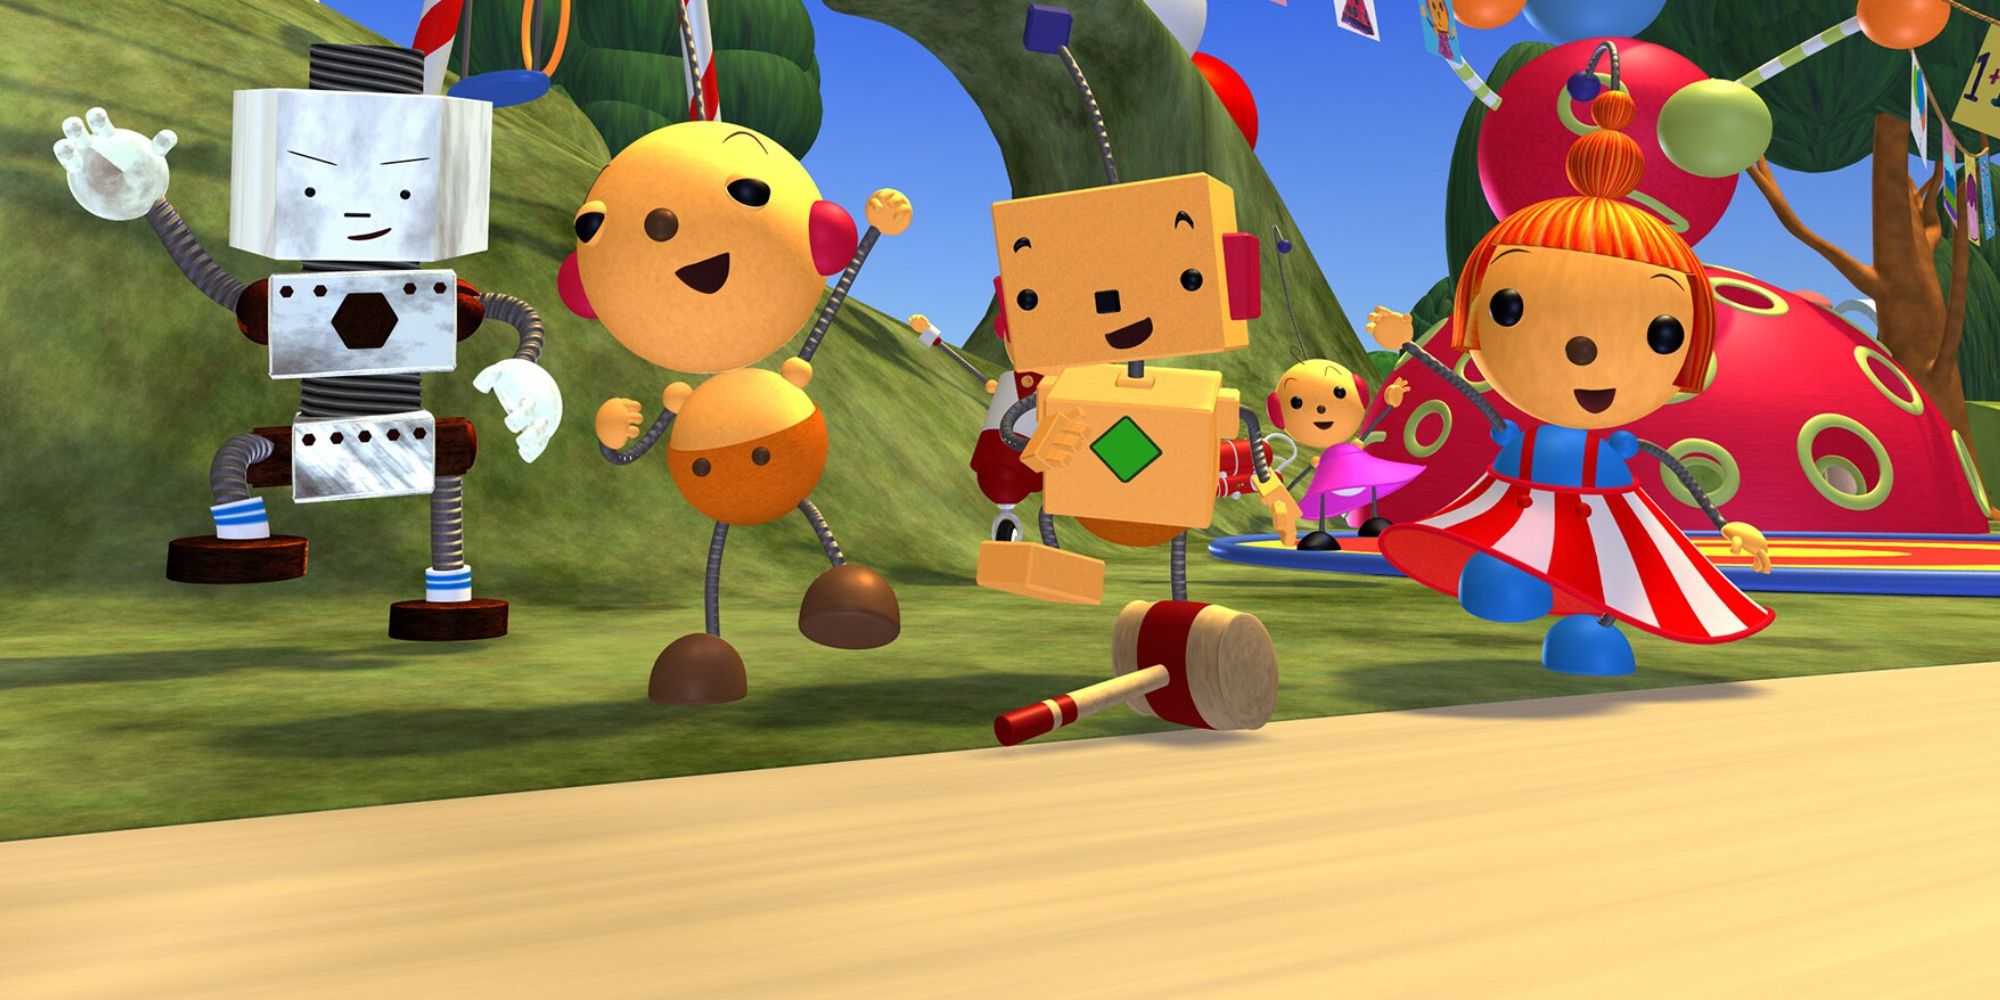 Characters from Rolie Polie Olie